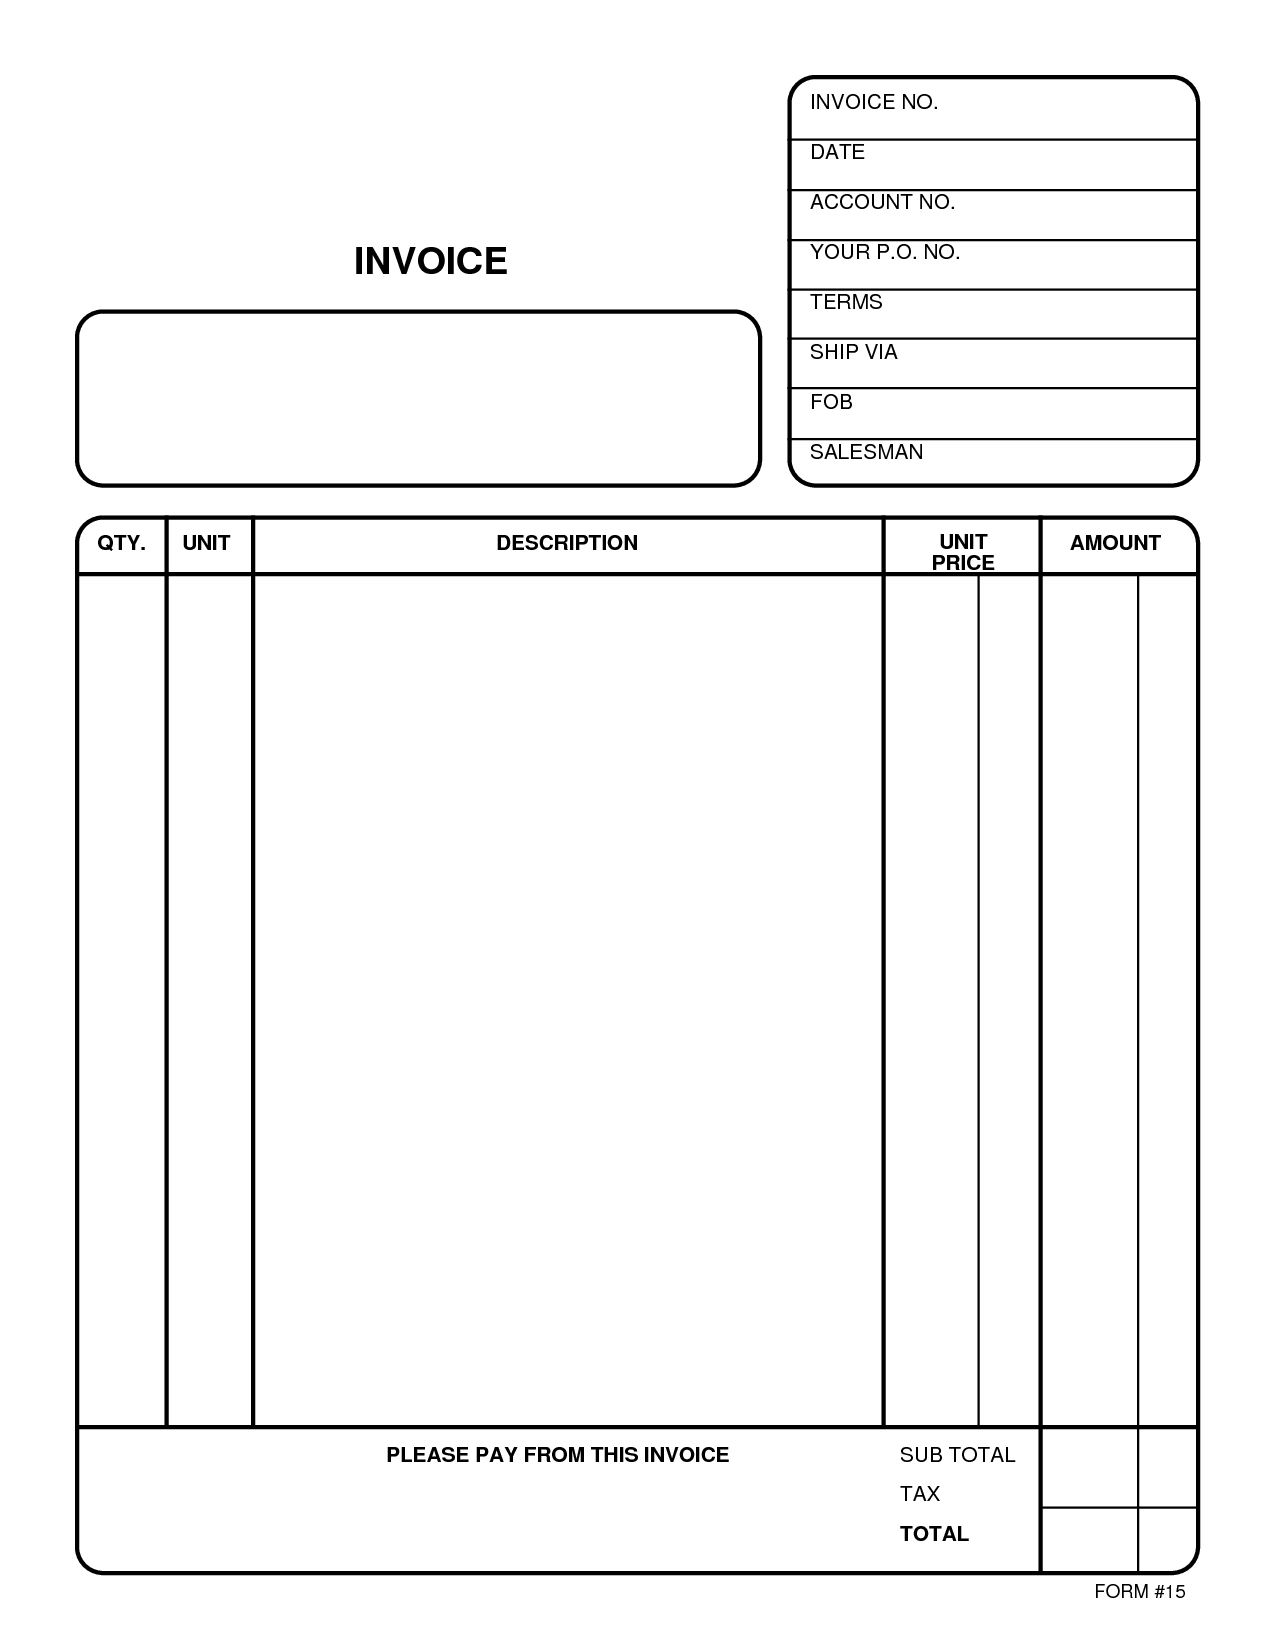 invoices for free invoices templates free invoice template free 2016 1275 X 1650